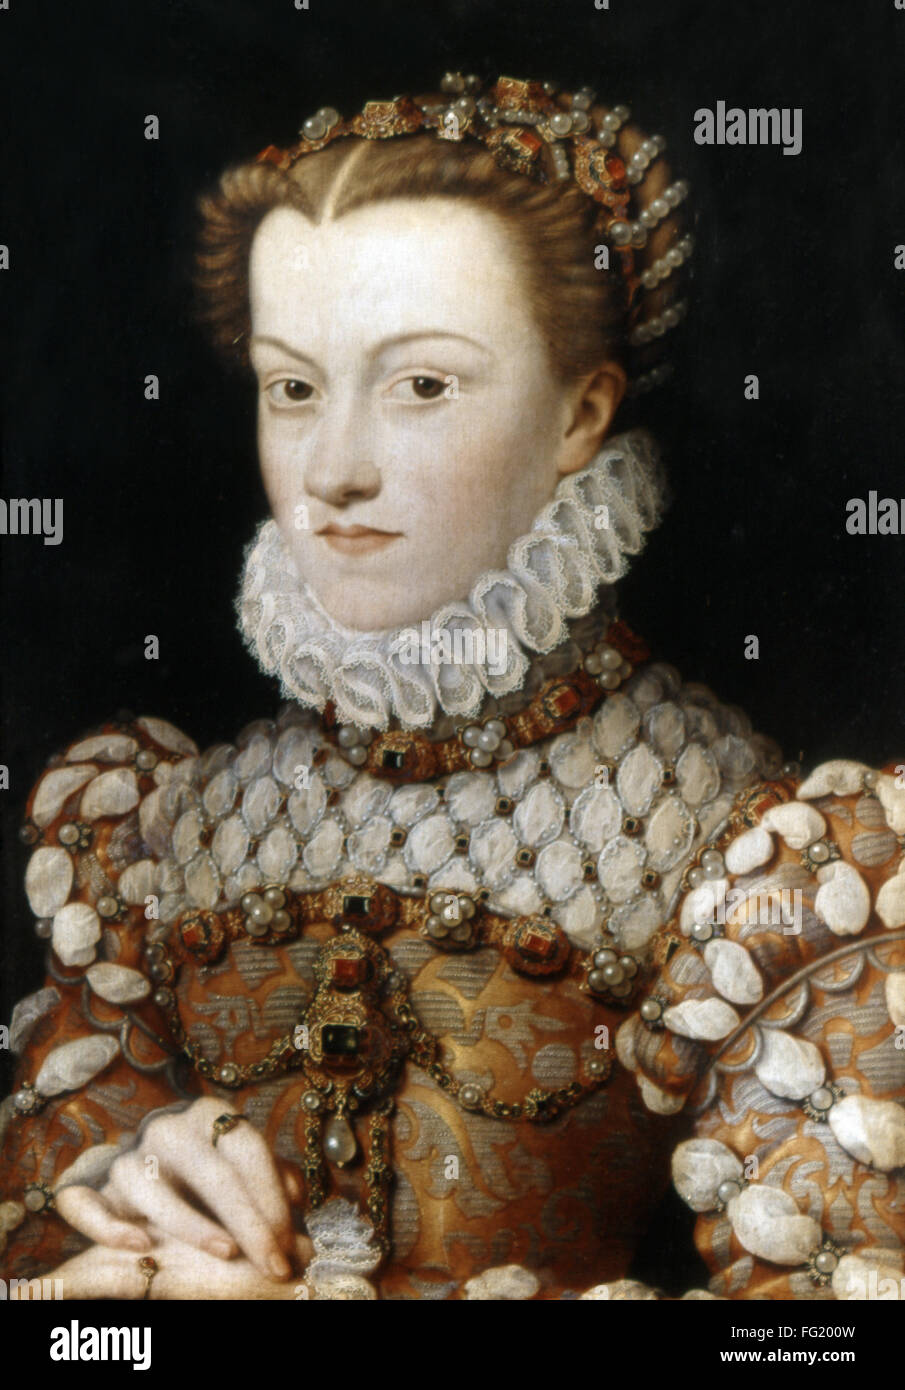 ELIZABETH OF AUSTRIA /n(1554-1592). Archduchess of Austria and Queen consort of Charles IX of France. Oil on wood, c1571, by Franτois Clouet. Stock Photo